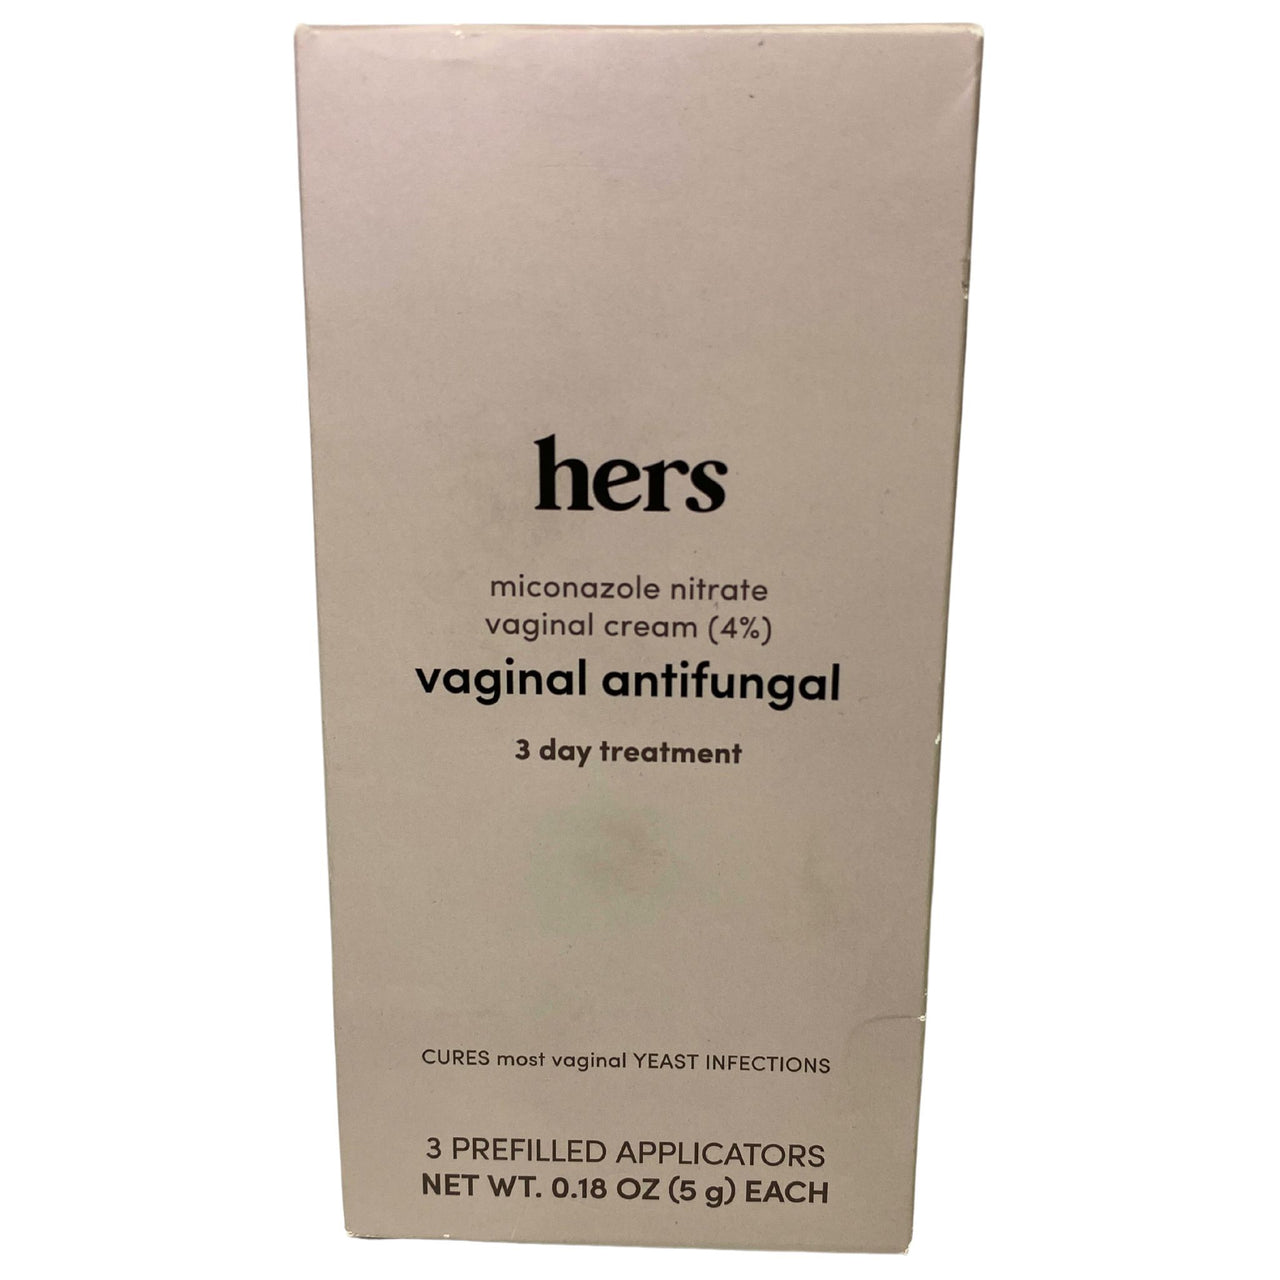 Hers Miconazole Nitrate Vaginal Cream